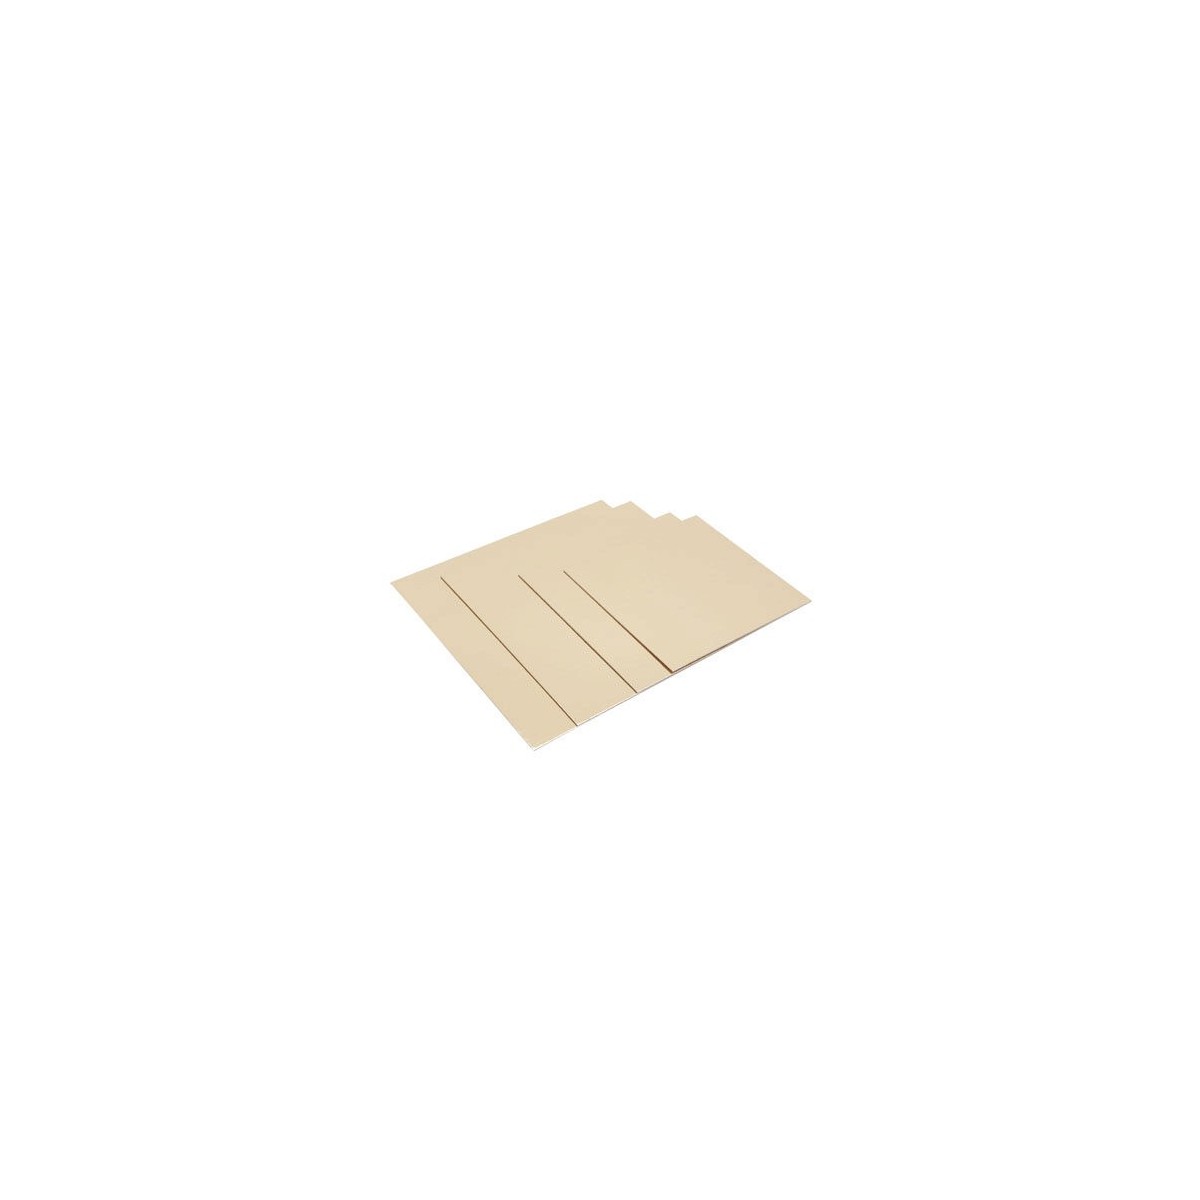 CAKE BOARD SQUARE GOLD 30 X 30CM 50 PIECES FOSTPLUS INCLUDED  PACKAGE ON/ORDER